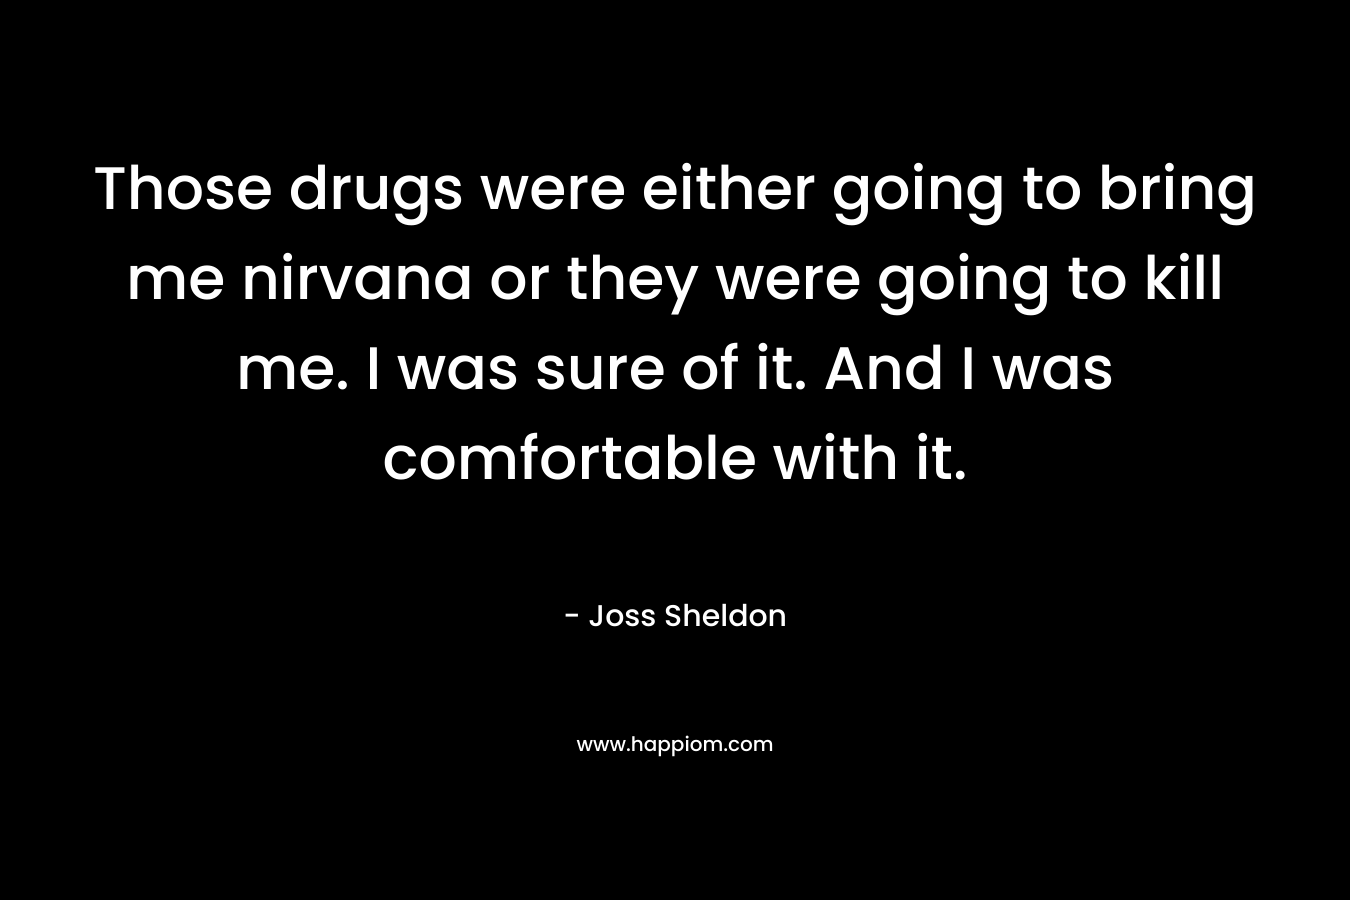 Those drugs were either going to bring me nirvana or they were going to kill me. I was sure of it. And I was comfortable with it. – Joss Sheldon